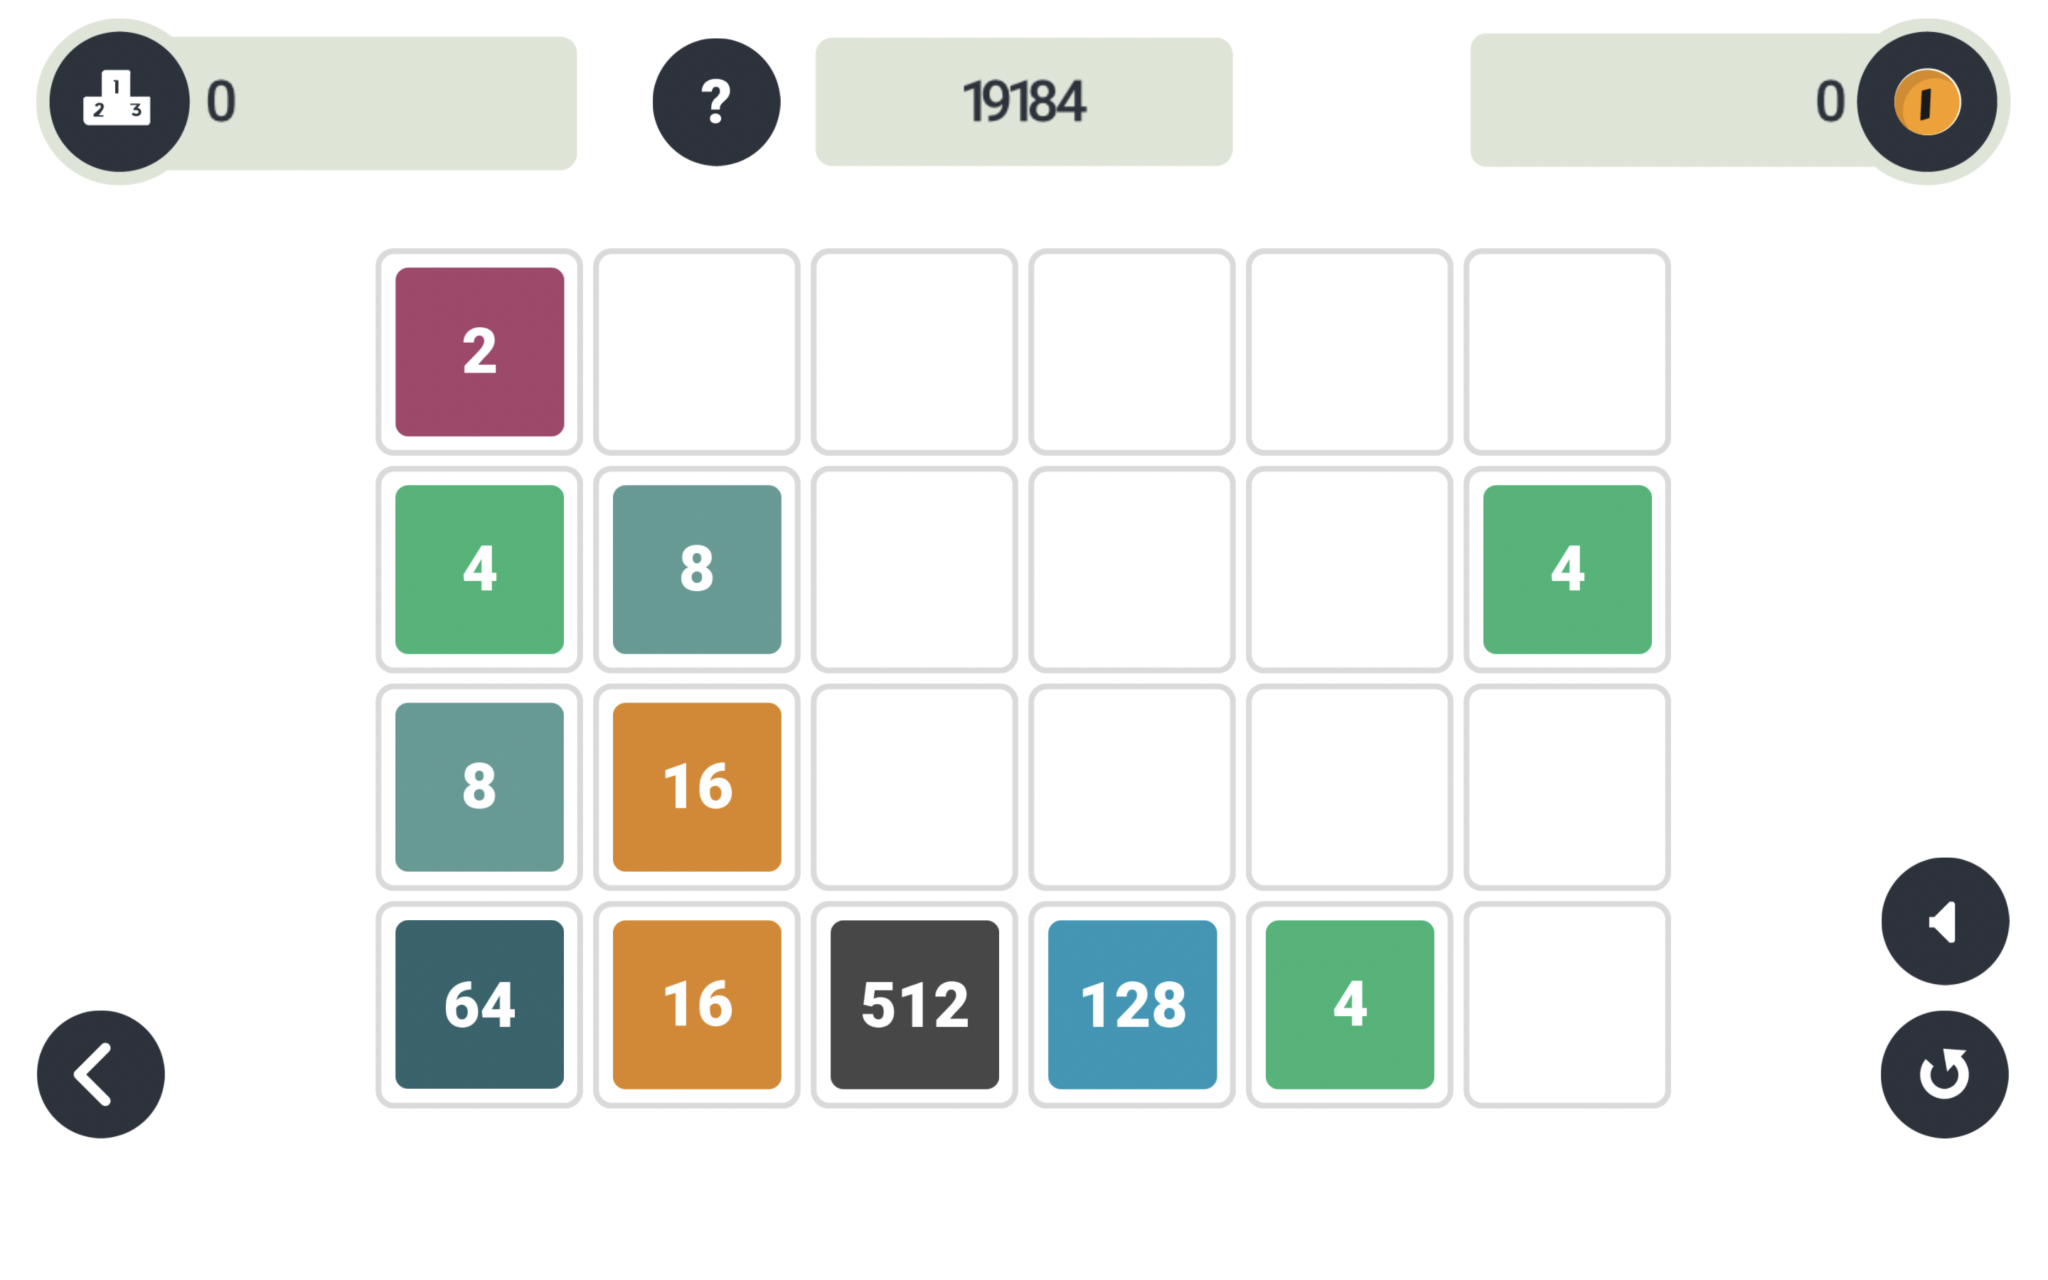 play game 2048 online